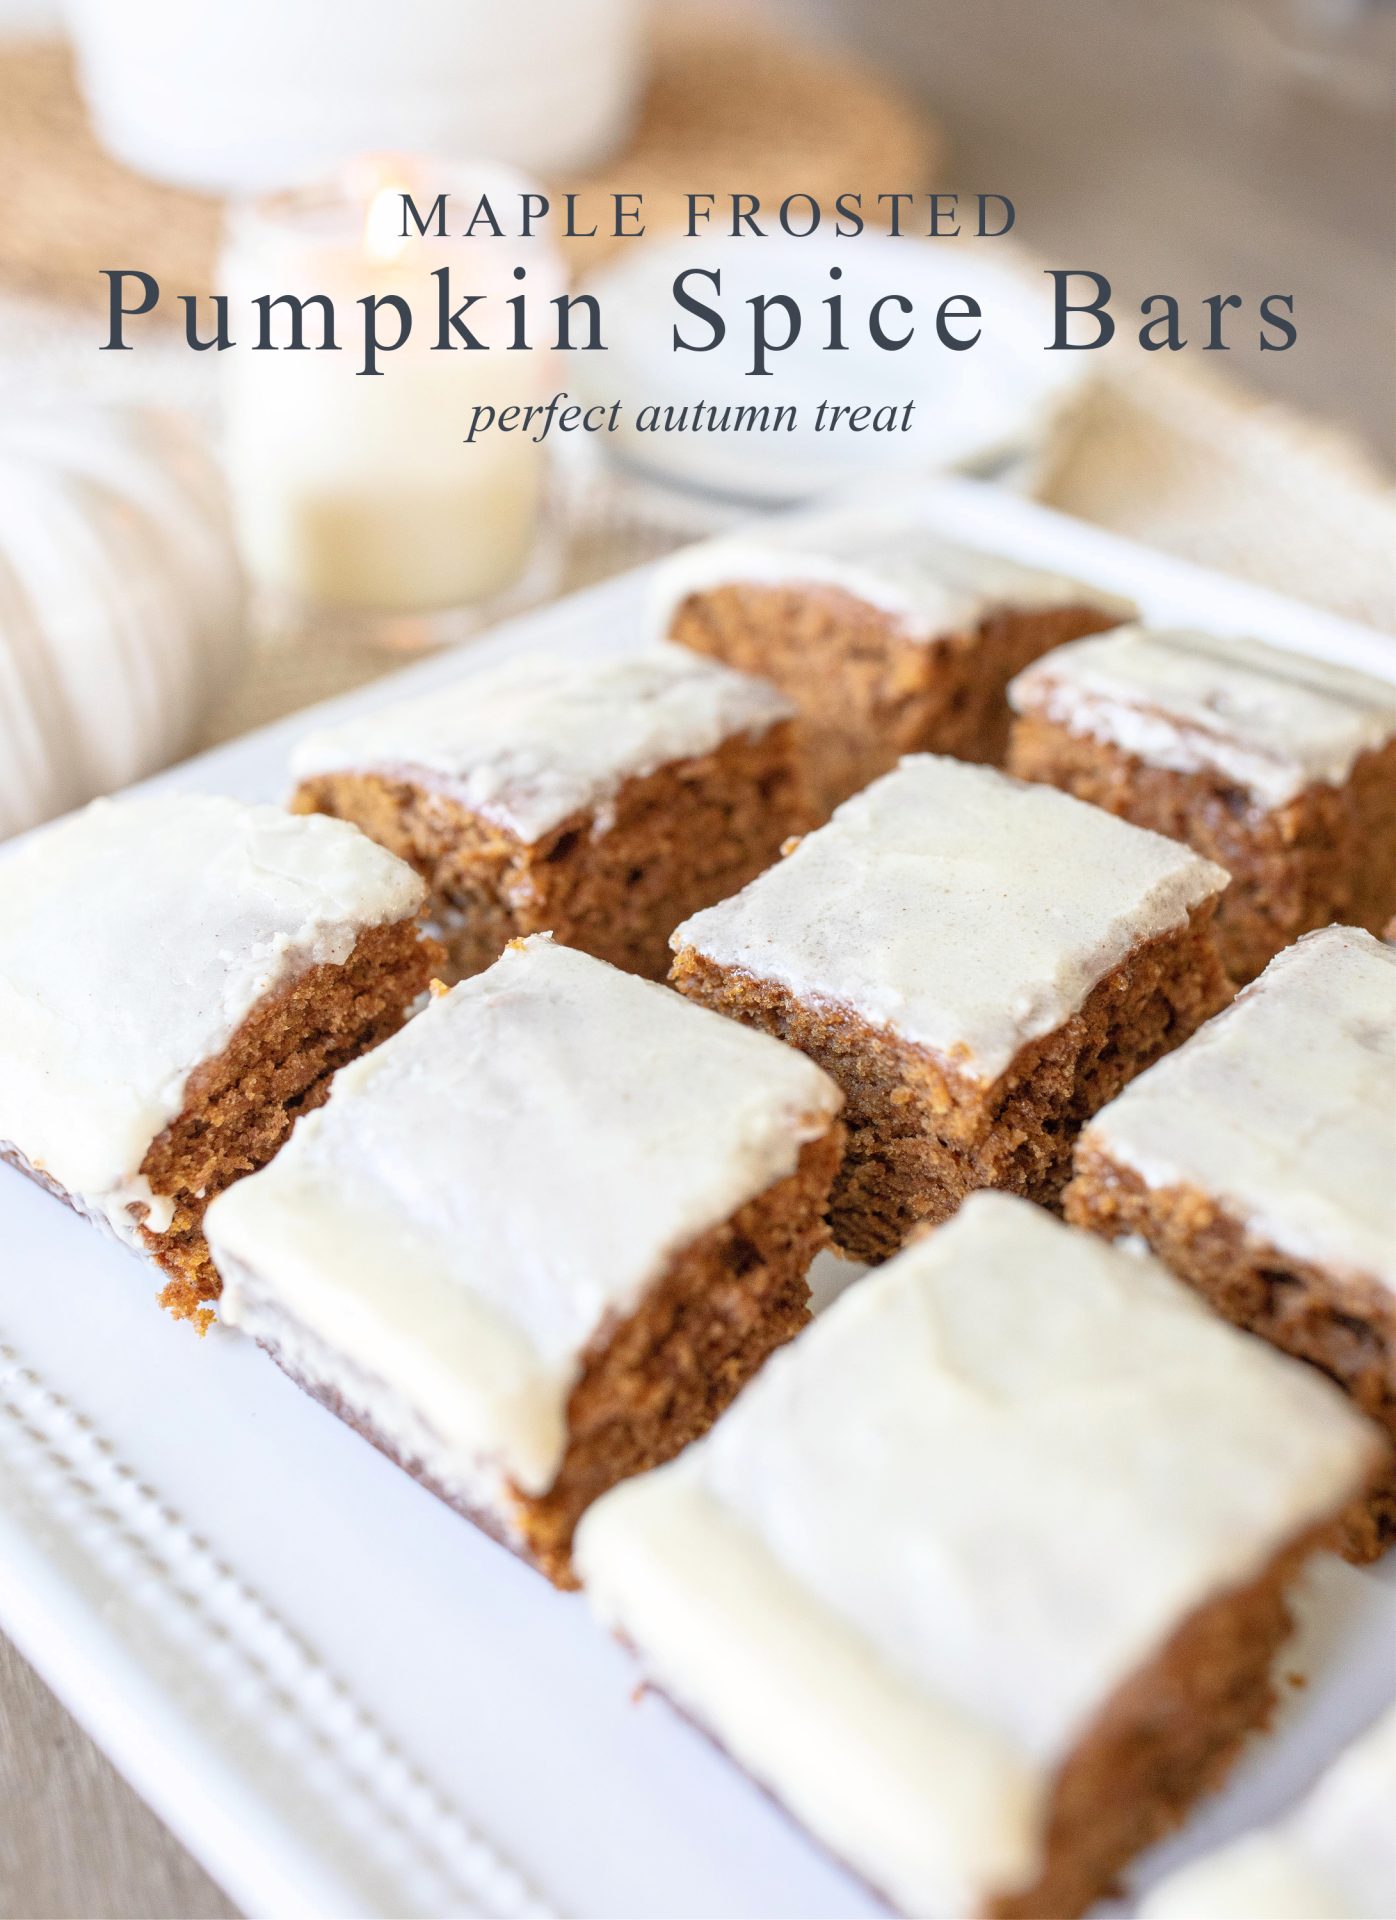 pumpkin spice bars, pumpkin spice, pumpkin bars, maple frosted, maple pumpkin spice, fall baking, easy to bake, iced pumpkin spice bars, pumpkin bar recipe, moist, the best pumpkin bar recipe, pumpkin spice bars with maple icing, simple ingredients, canned pumpkin, autumn, fall recipe, fall pumpkin recipe, the best pumpkin bars, pumpkin bars without cream cheese frosting